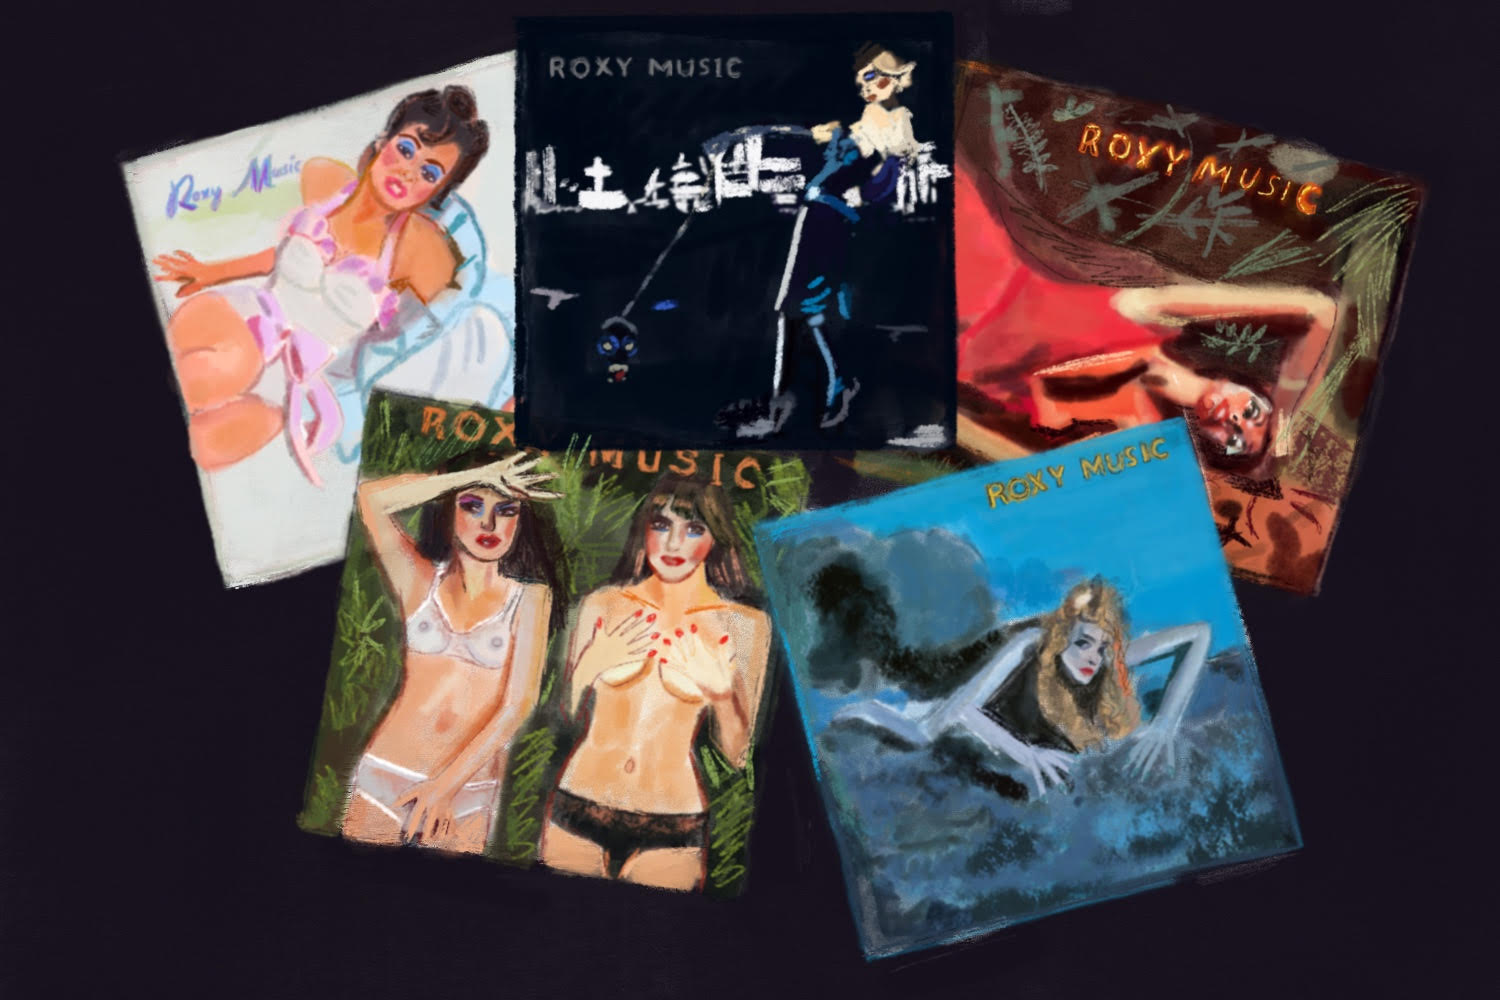 How Roxy Musics Soft-Core Pin-Up Girls Saved the Album Cover